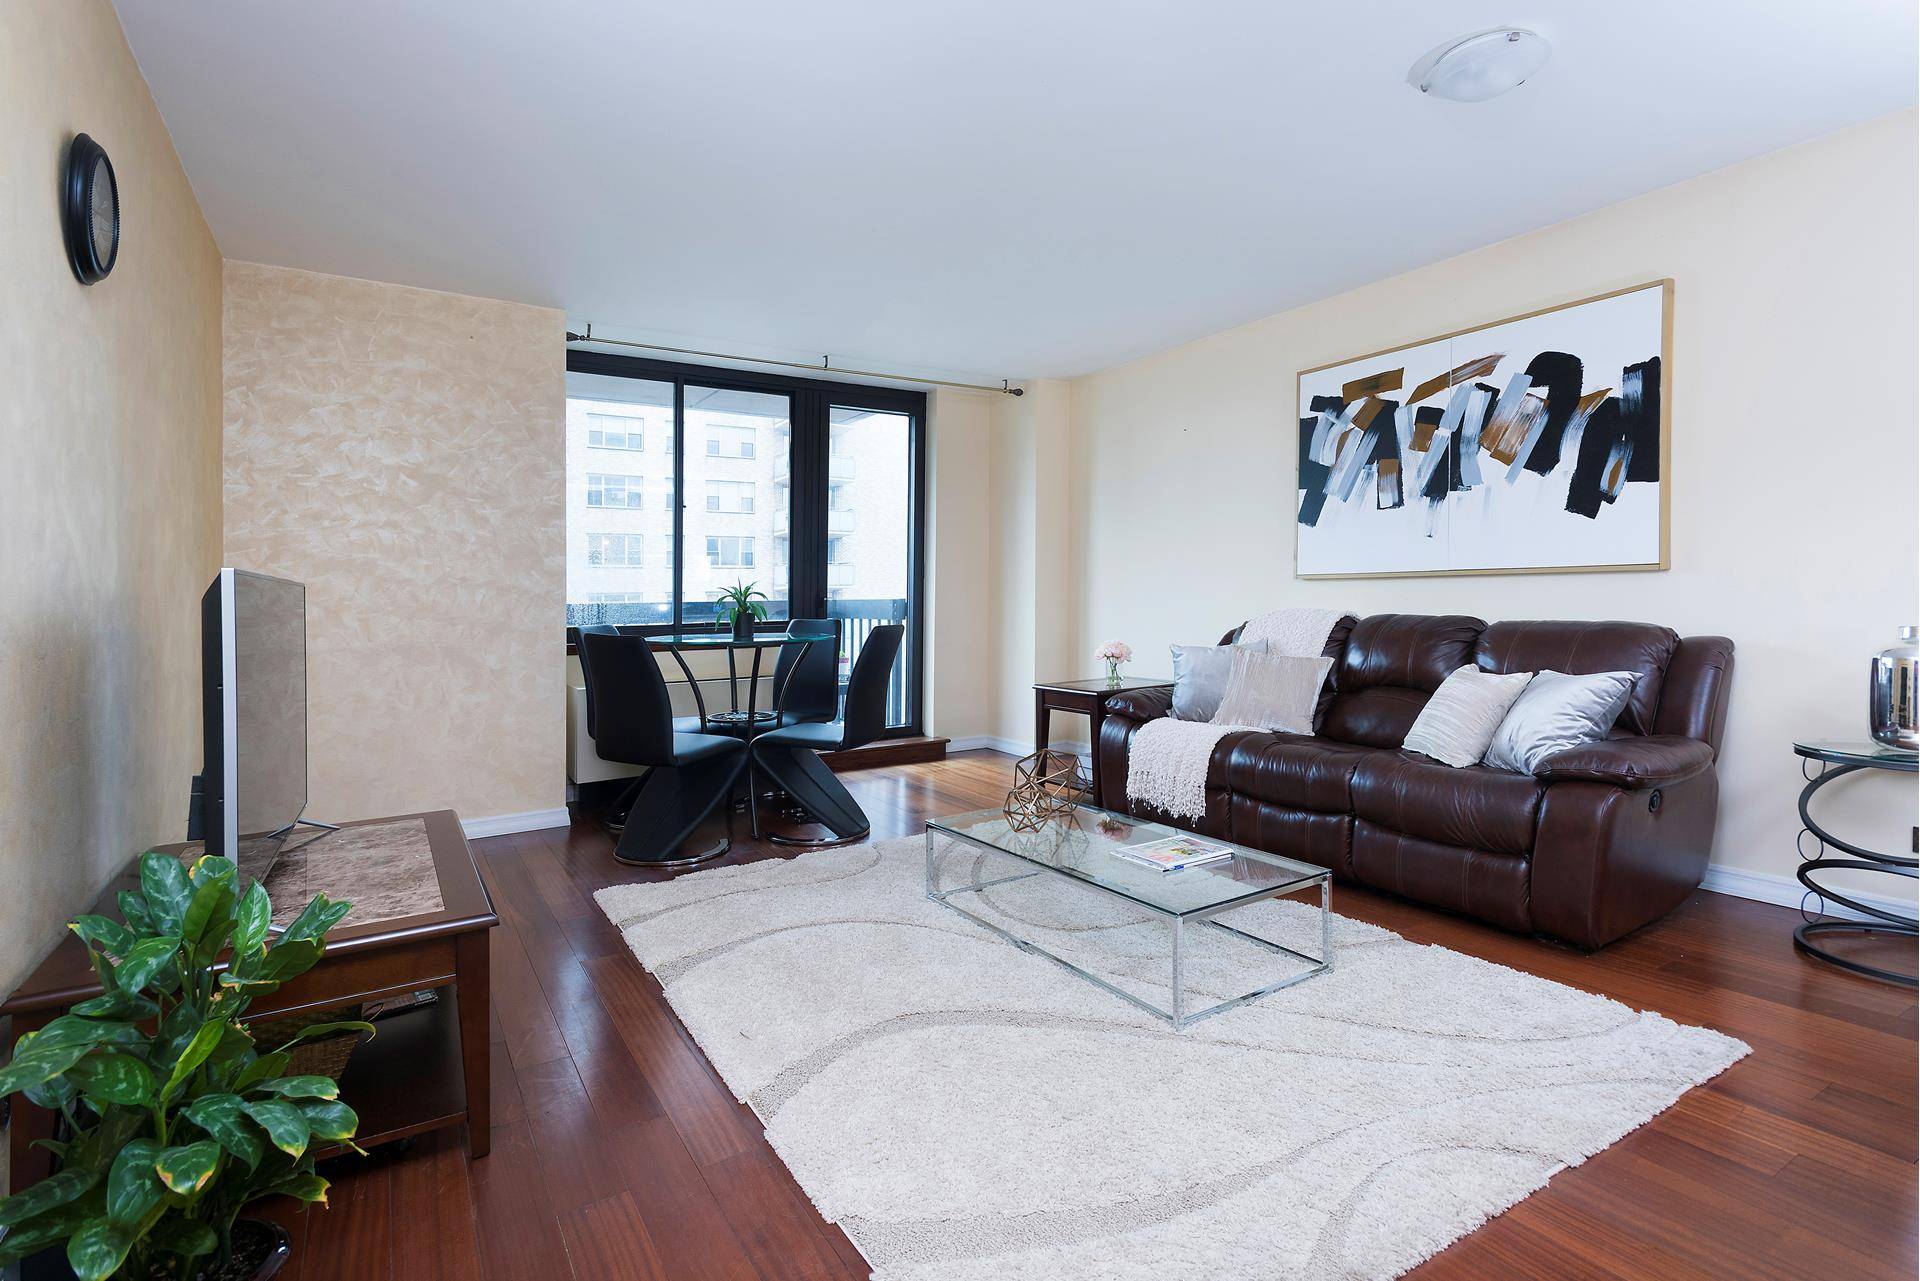 RENOVATED 1 BED 1. 5 BATH WITH A BALCONY amp ; VIEWS IN DM CONDO WITH POOL !